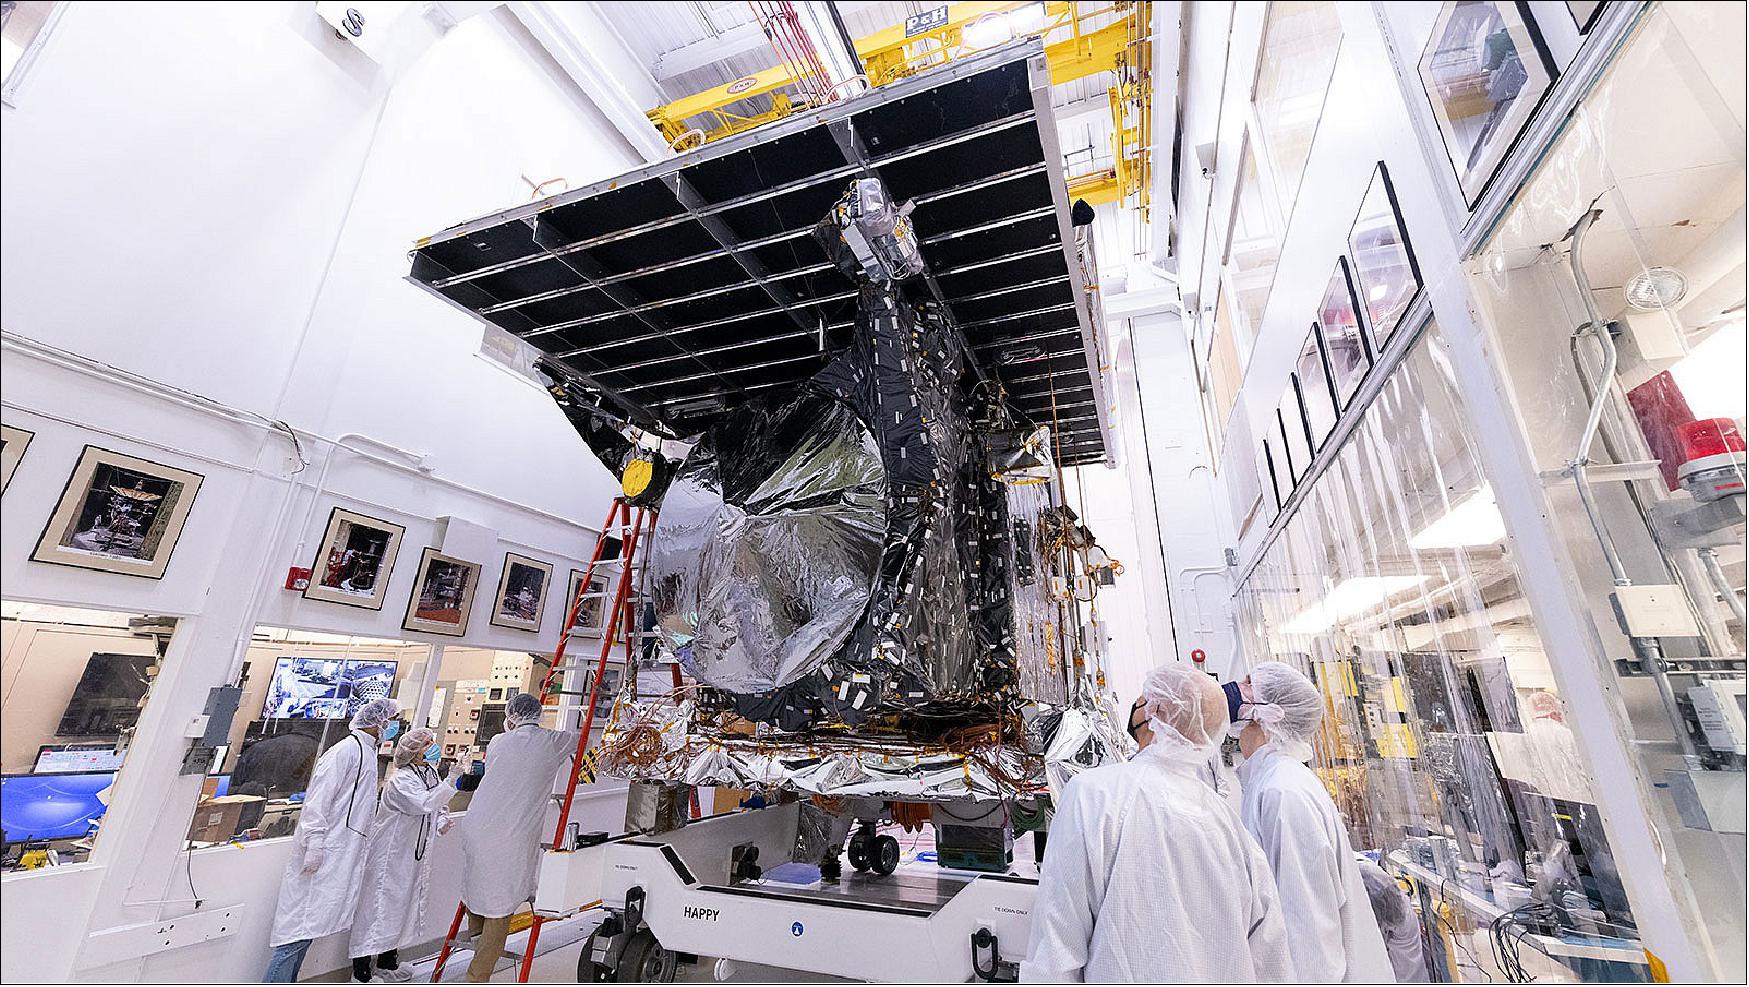 Figure 5: NASA’s Psyche spacecraft is seen on its way to the vacuum chamber at the agency’s Jet Propulsion Laboratory in Southern California (image credit: NASA/JPL-Caltech)